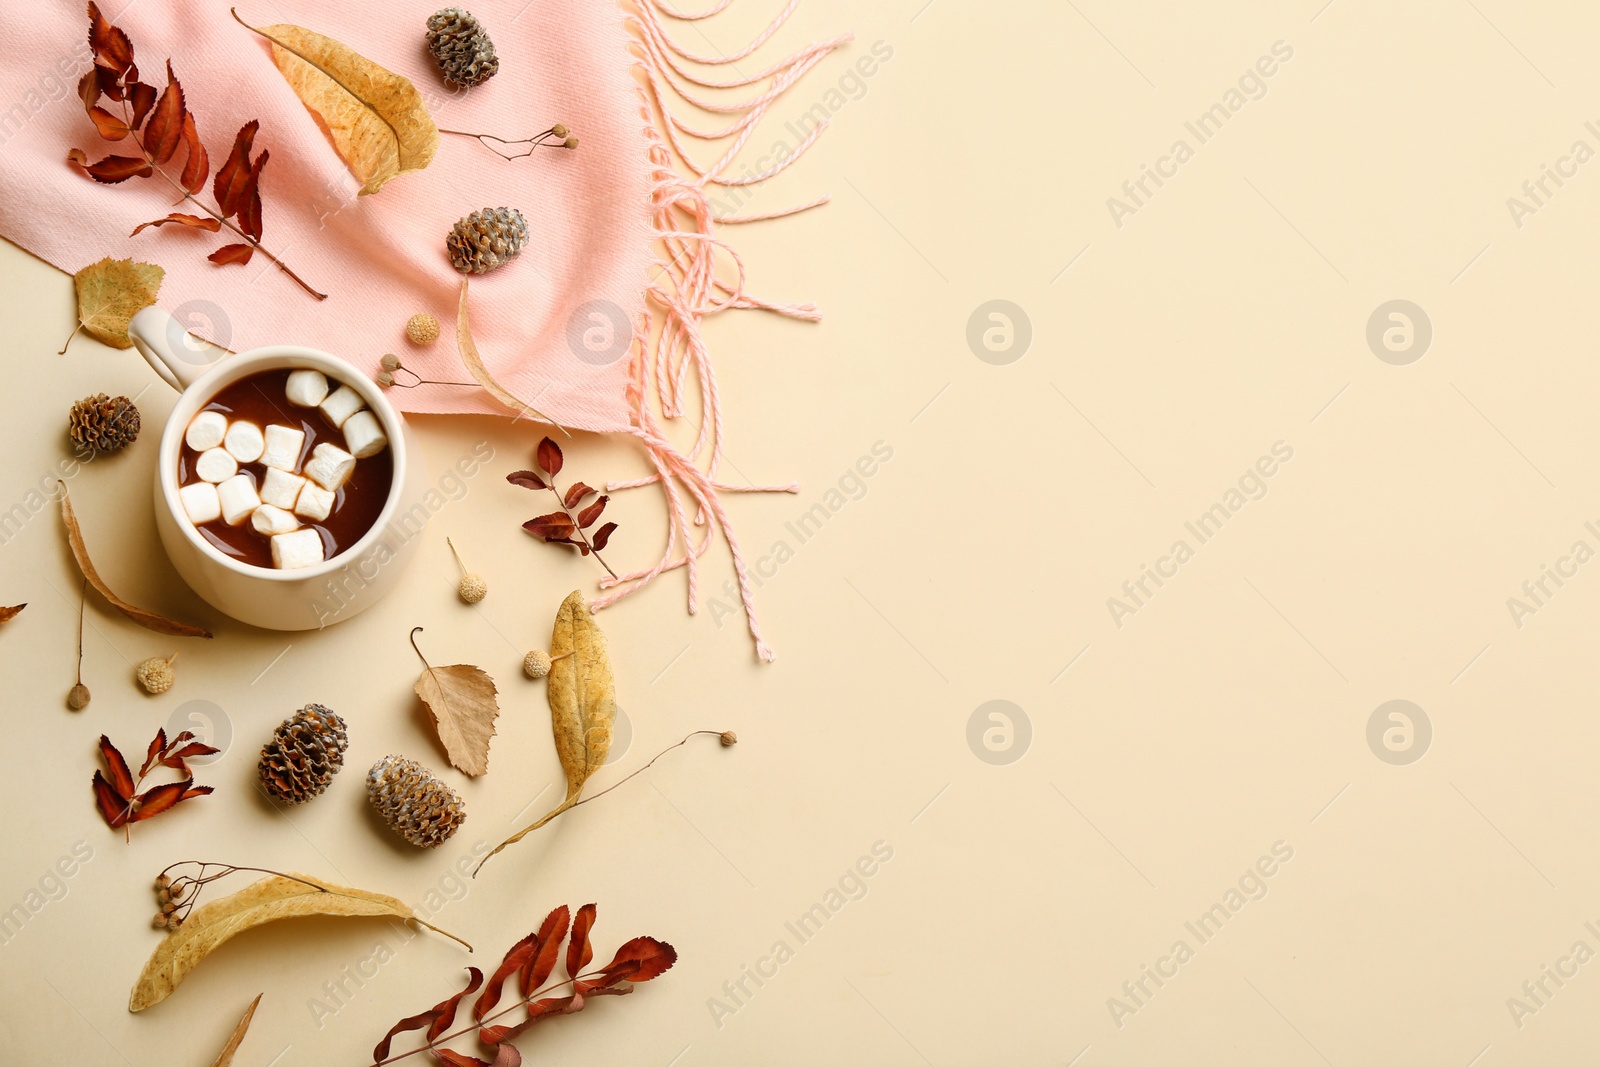 Photo of Flat lay composition with cup of hot drink, scarf and autumn leaves on beige background, space for text. Cozy atmosphere